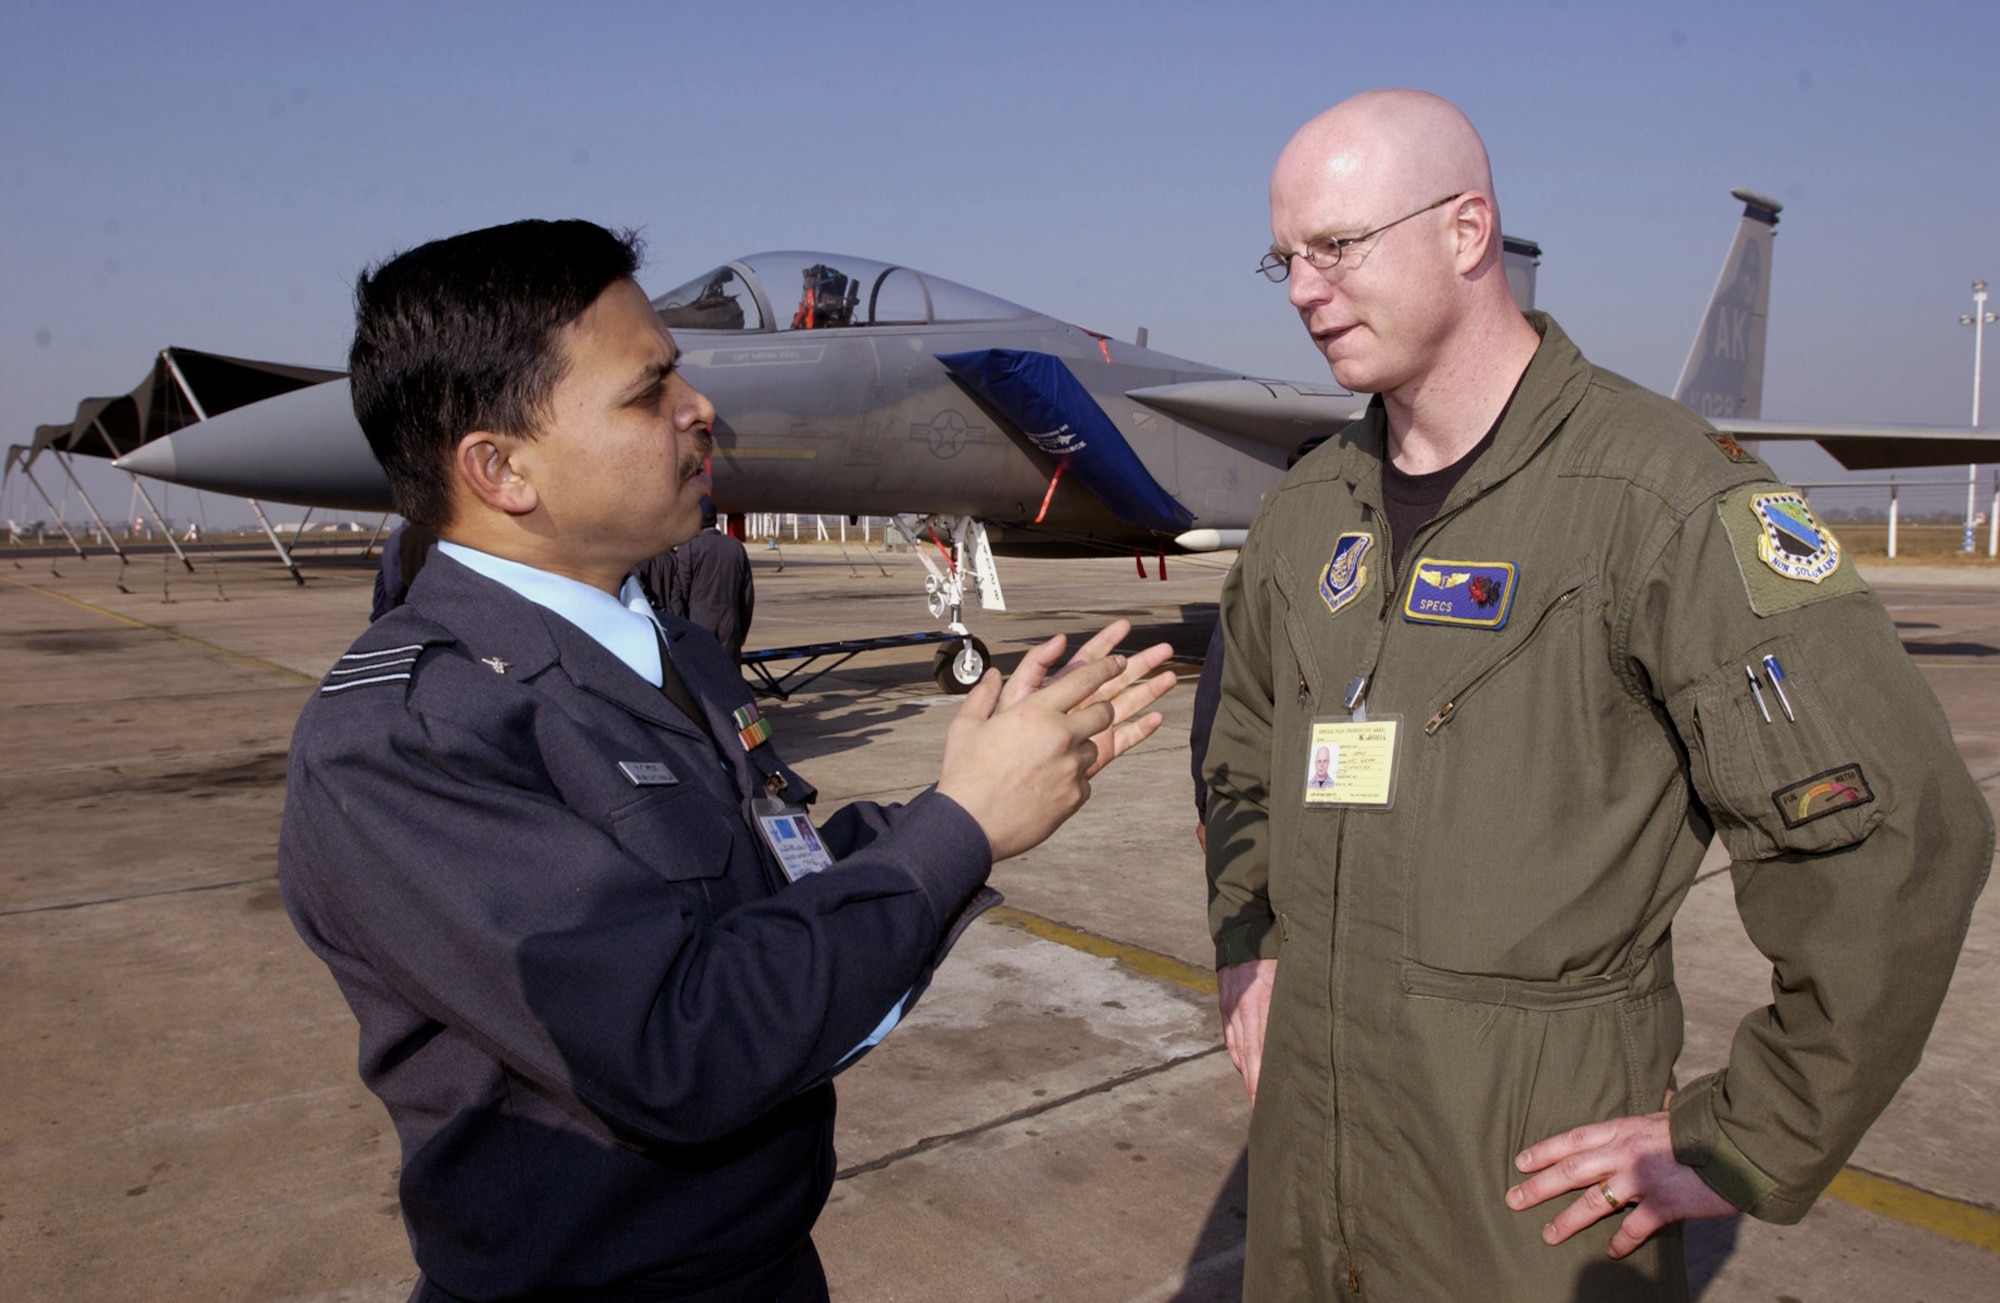 GWALIOR AIR FORCE STATION, India (AFPN) -- Squadron Leader (Dr.) M.S. Nataraja (left) discusses medical issues with Maj. (Dr.) Tim McGraw here.  Both doctors are participating in Cope India 04, a bilateral fighter training exercise between the American and Indian air forces.  Aircraft and approximately 150 airmen from Elmendorf Air Force Base, Alaska, are deployed for the exercise. (U.S. Air Force photo by Tech Sgt. Keith Brown)